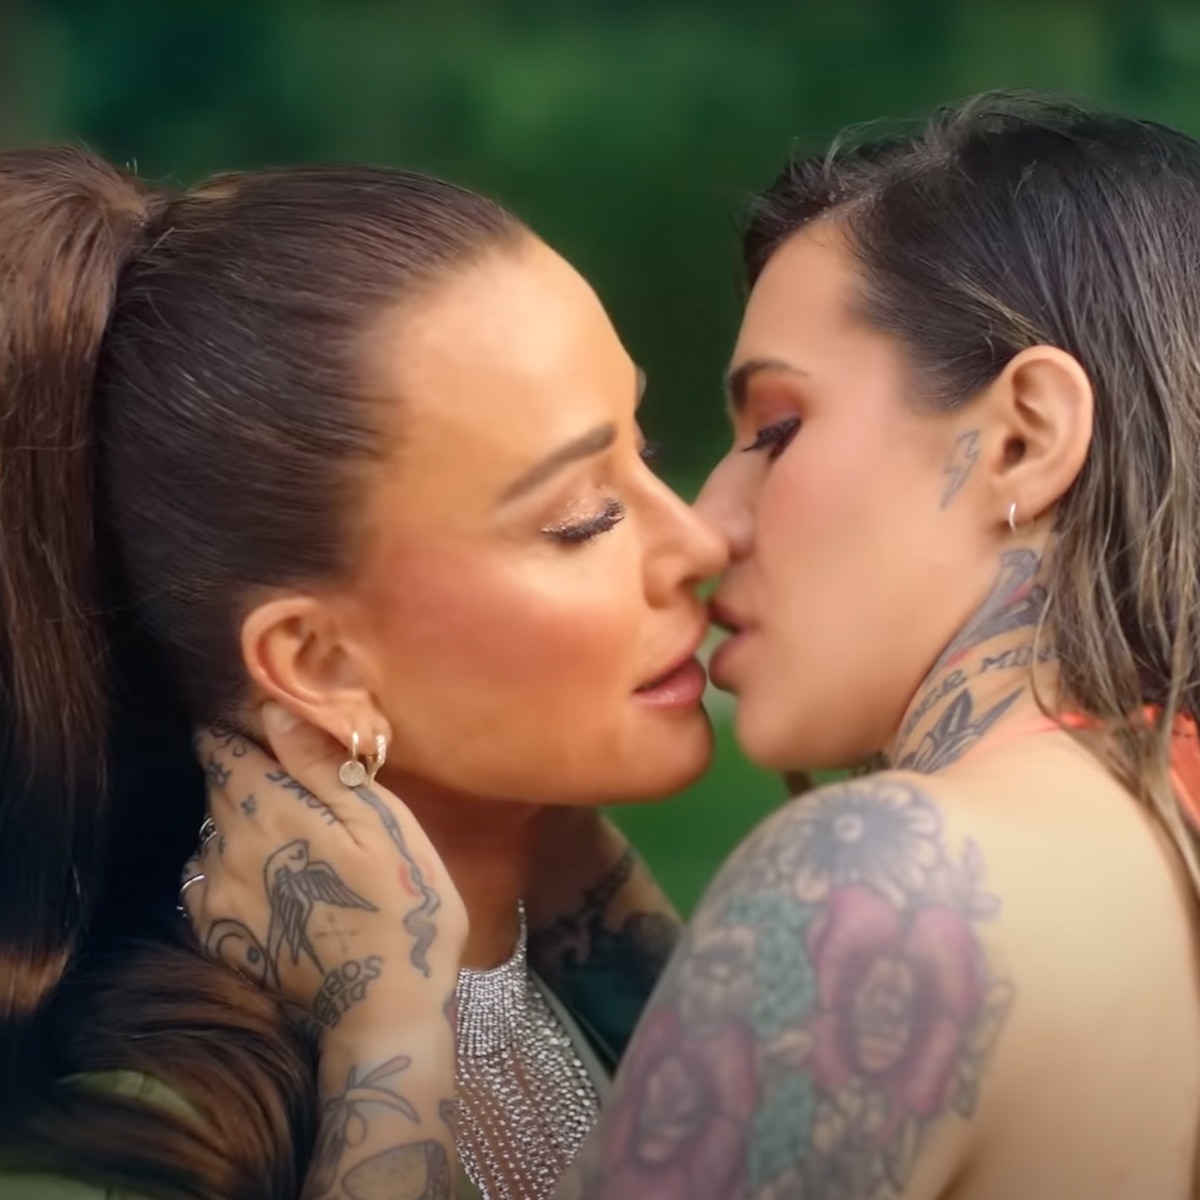 Kyle Richards and Morgan Wade Strip Down in Steamy New Music Video picture picture picture